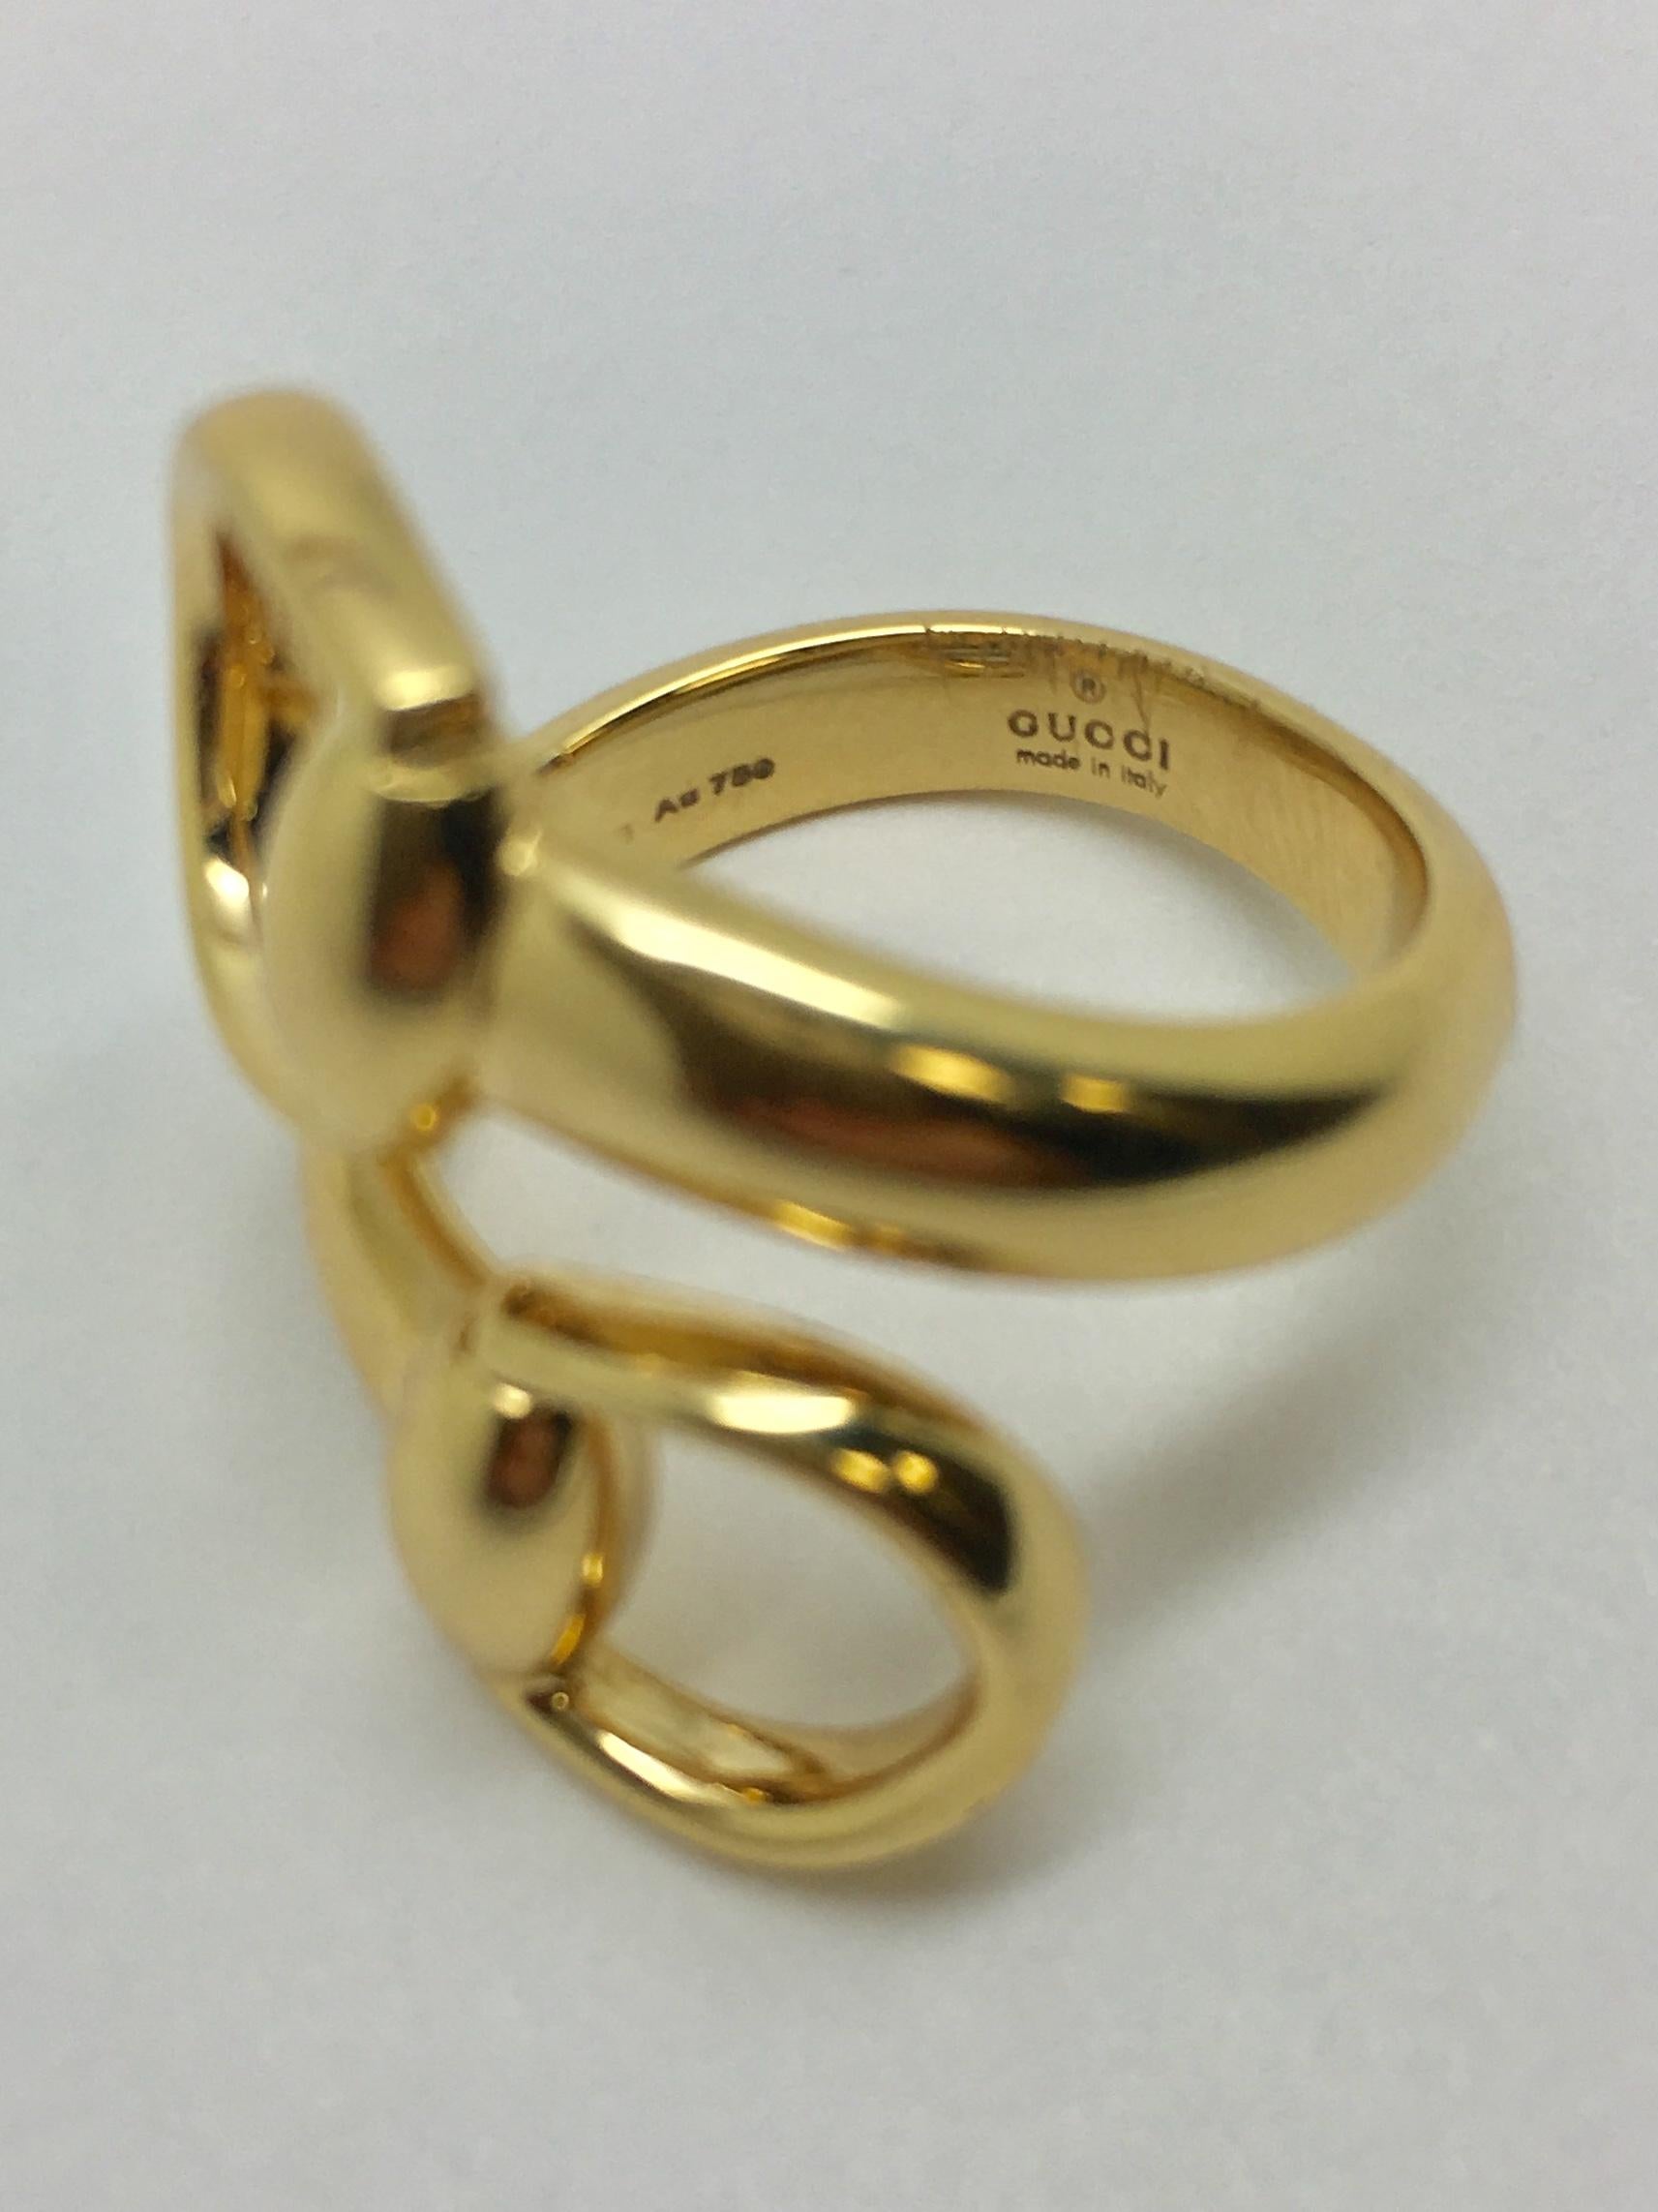 Gucci Horsebit 18 Karat Yellow Gold Ring In Good Condition For Sale In Ottawa, Ontario